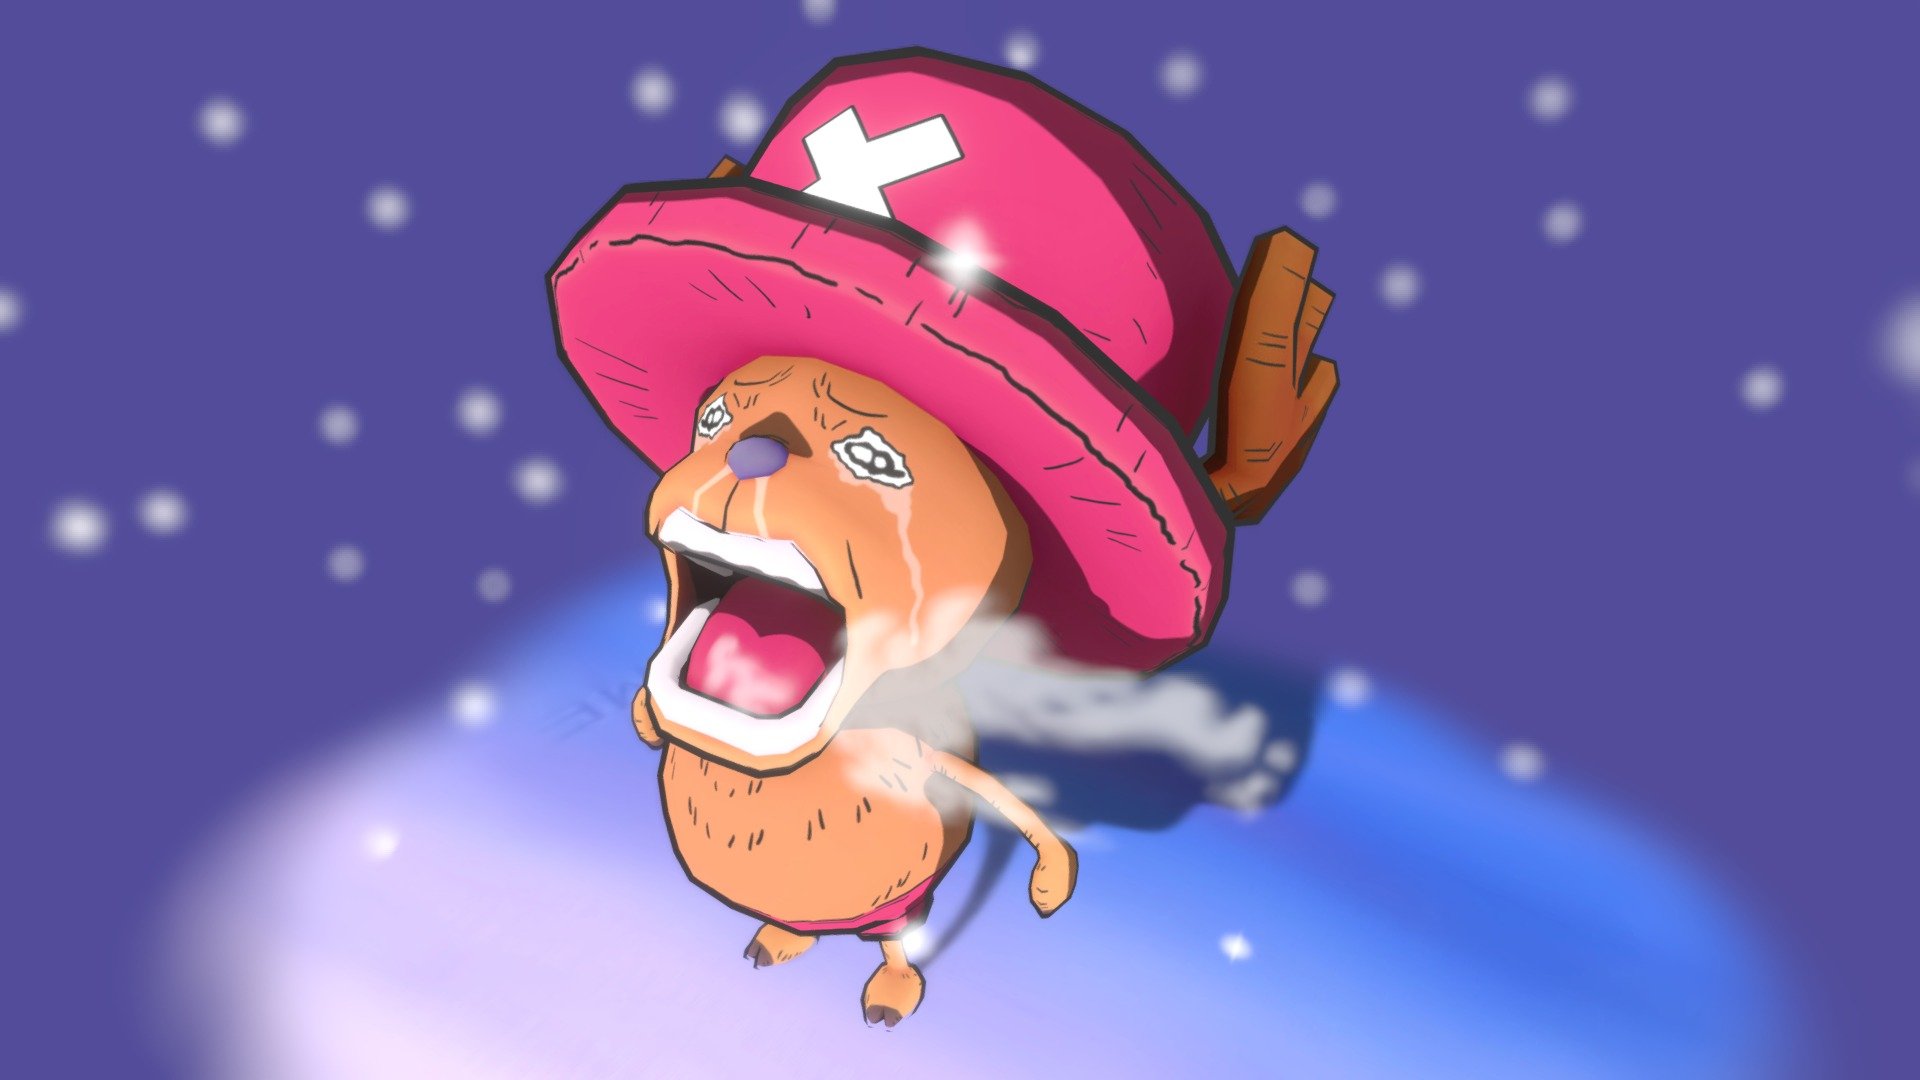 Chopper crying meme can we get much higher